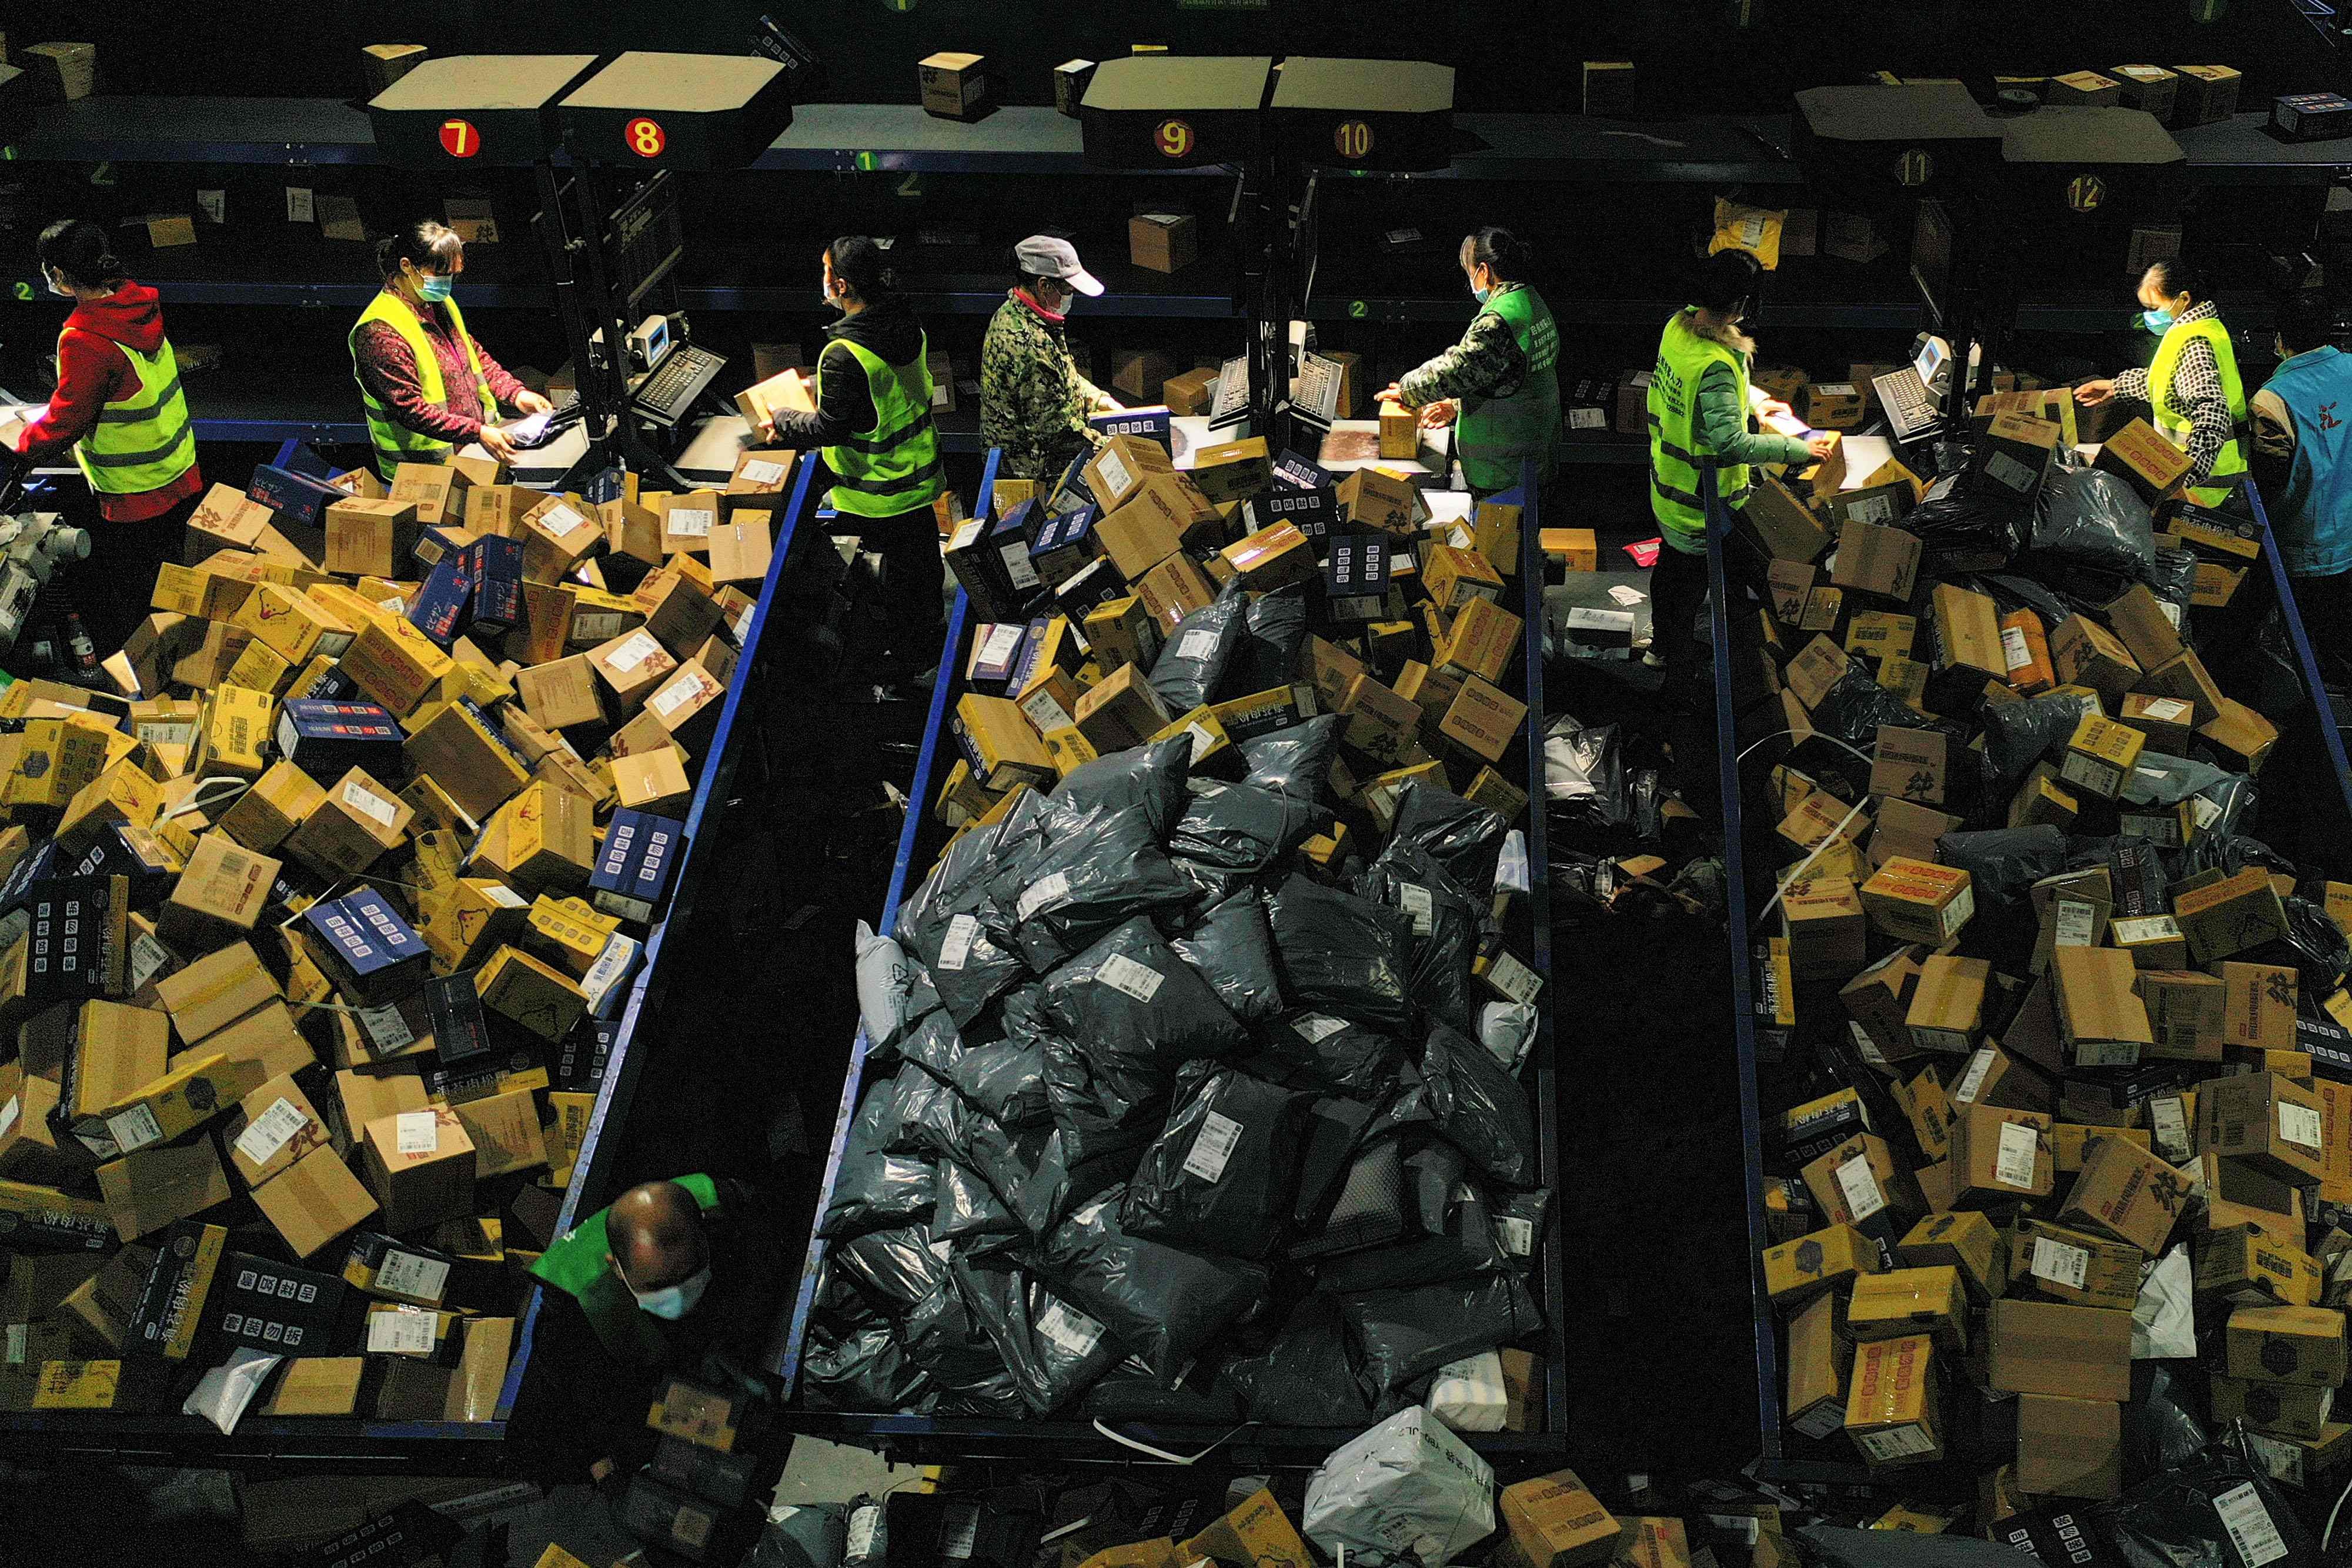 Workers sort packages at a logistics company in the China’s Hunan province on November 12, 2021, a day after the annual Singles’ Day online shopping gala. Photo: AFP